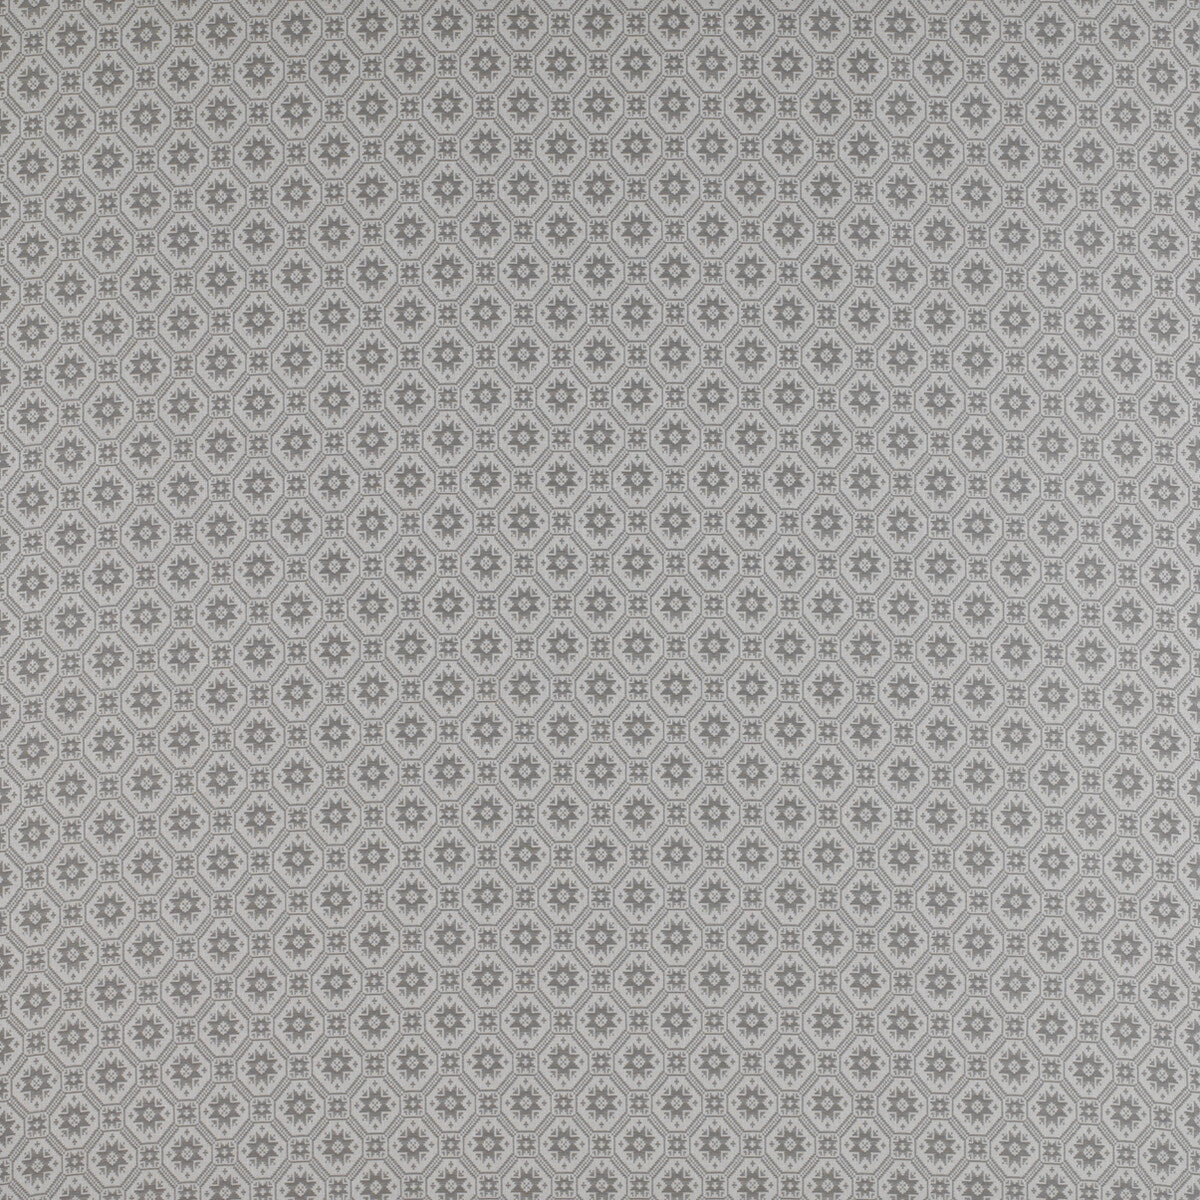 Delicias fabric in gris color - pattern GDT5198.008.0 - by Gaston y Daniela in the Madrid collection